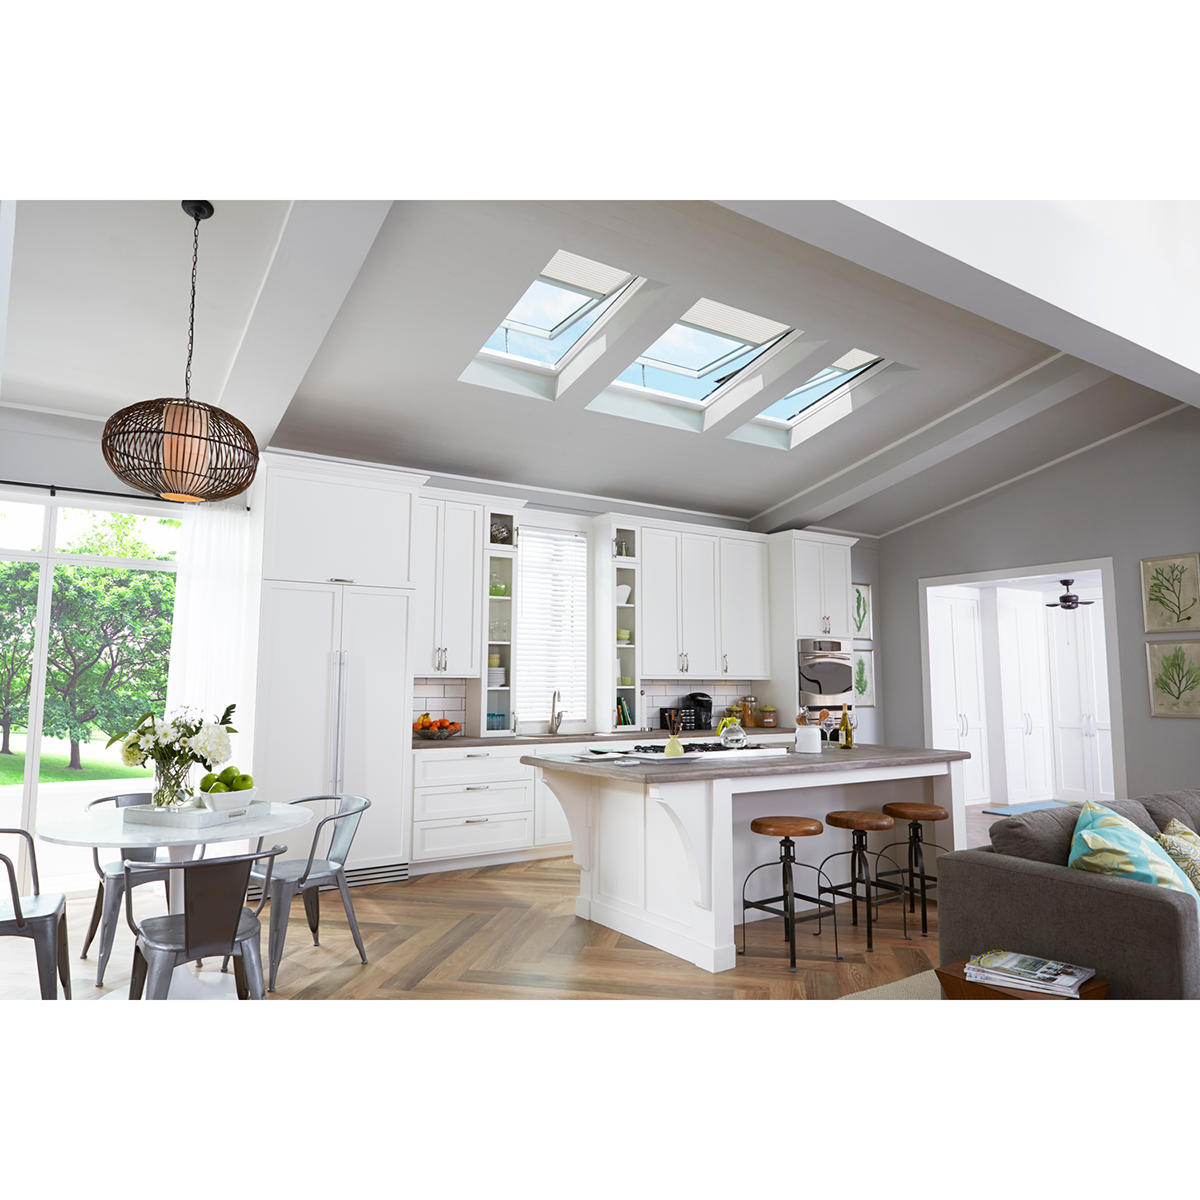 Solar Powered Curb-Mount Skylight with Laminated Low-E3 Glass - 46-1/2 in. x 46-1/2 in. - VCS 4646